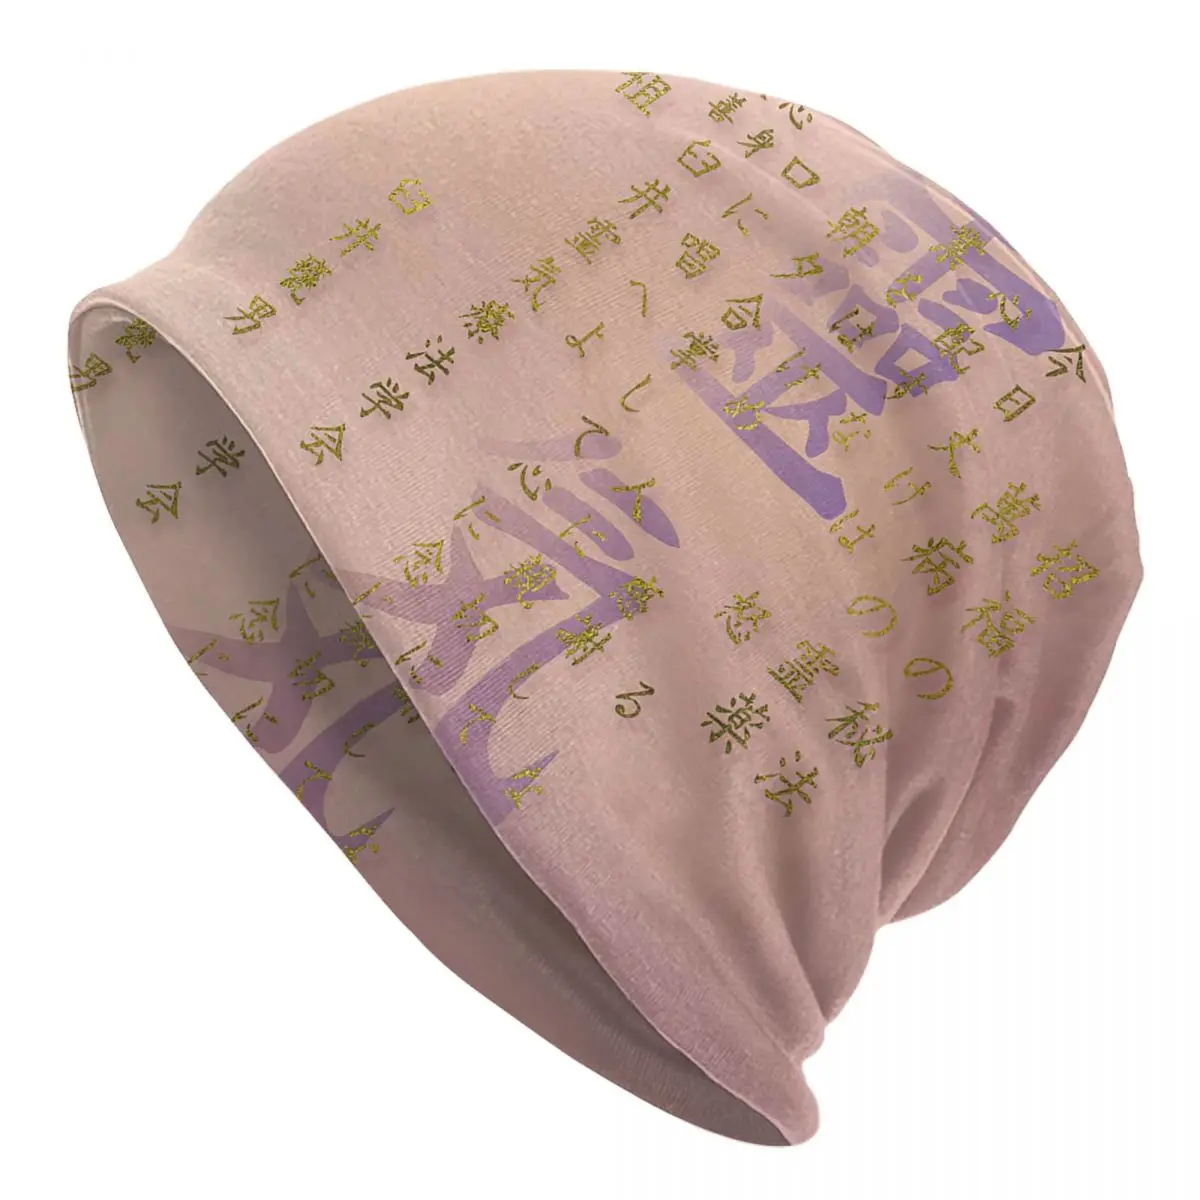 Reiki Precepts In Gold On Pastel Pink Adult Men's Women's Knit Hat Keep warm winter knitted hat